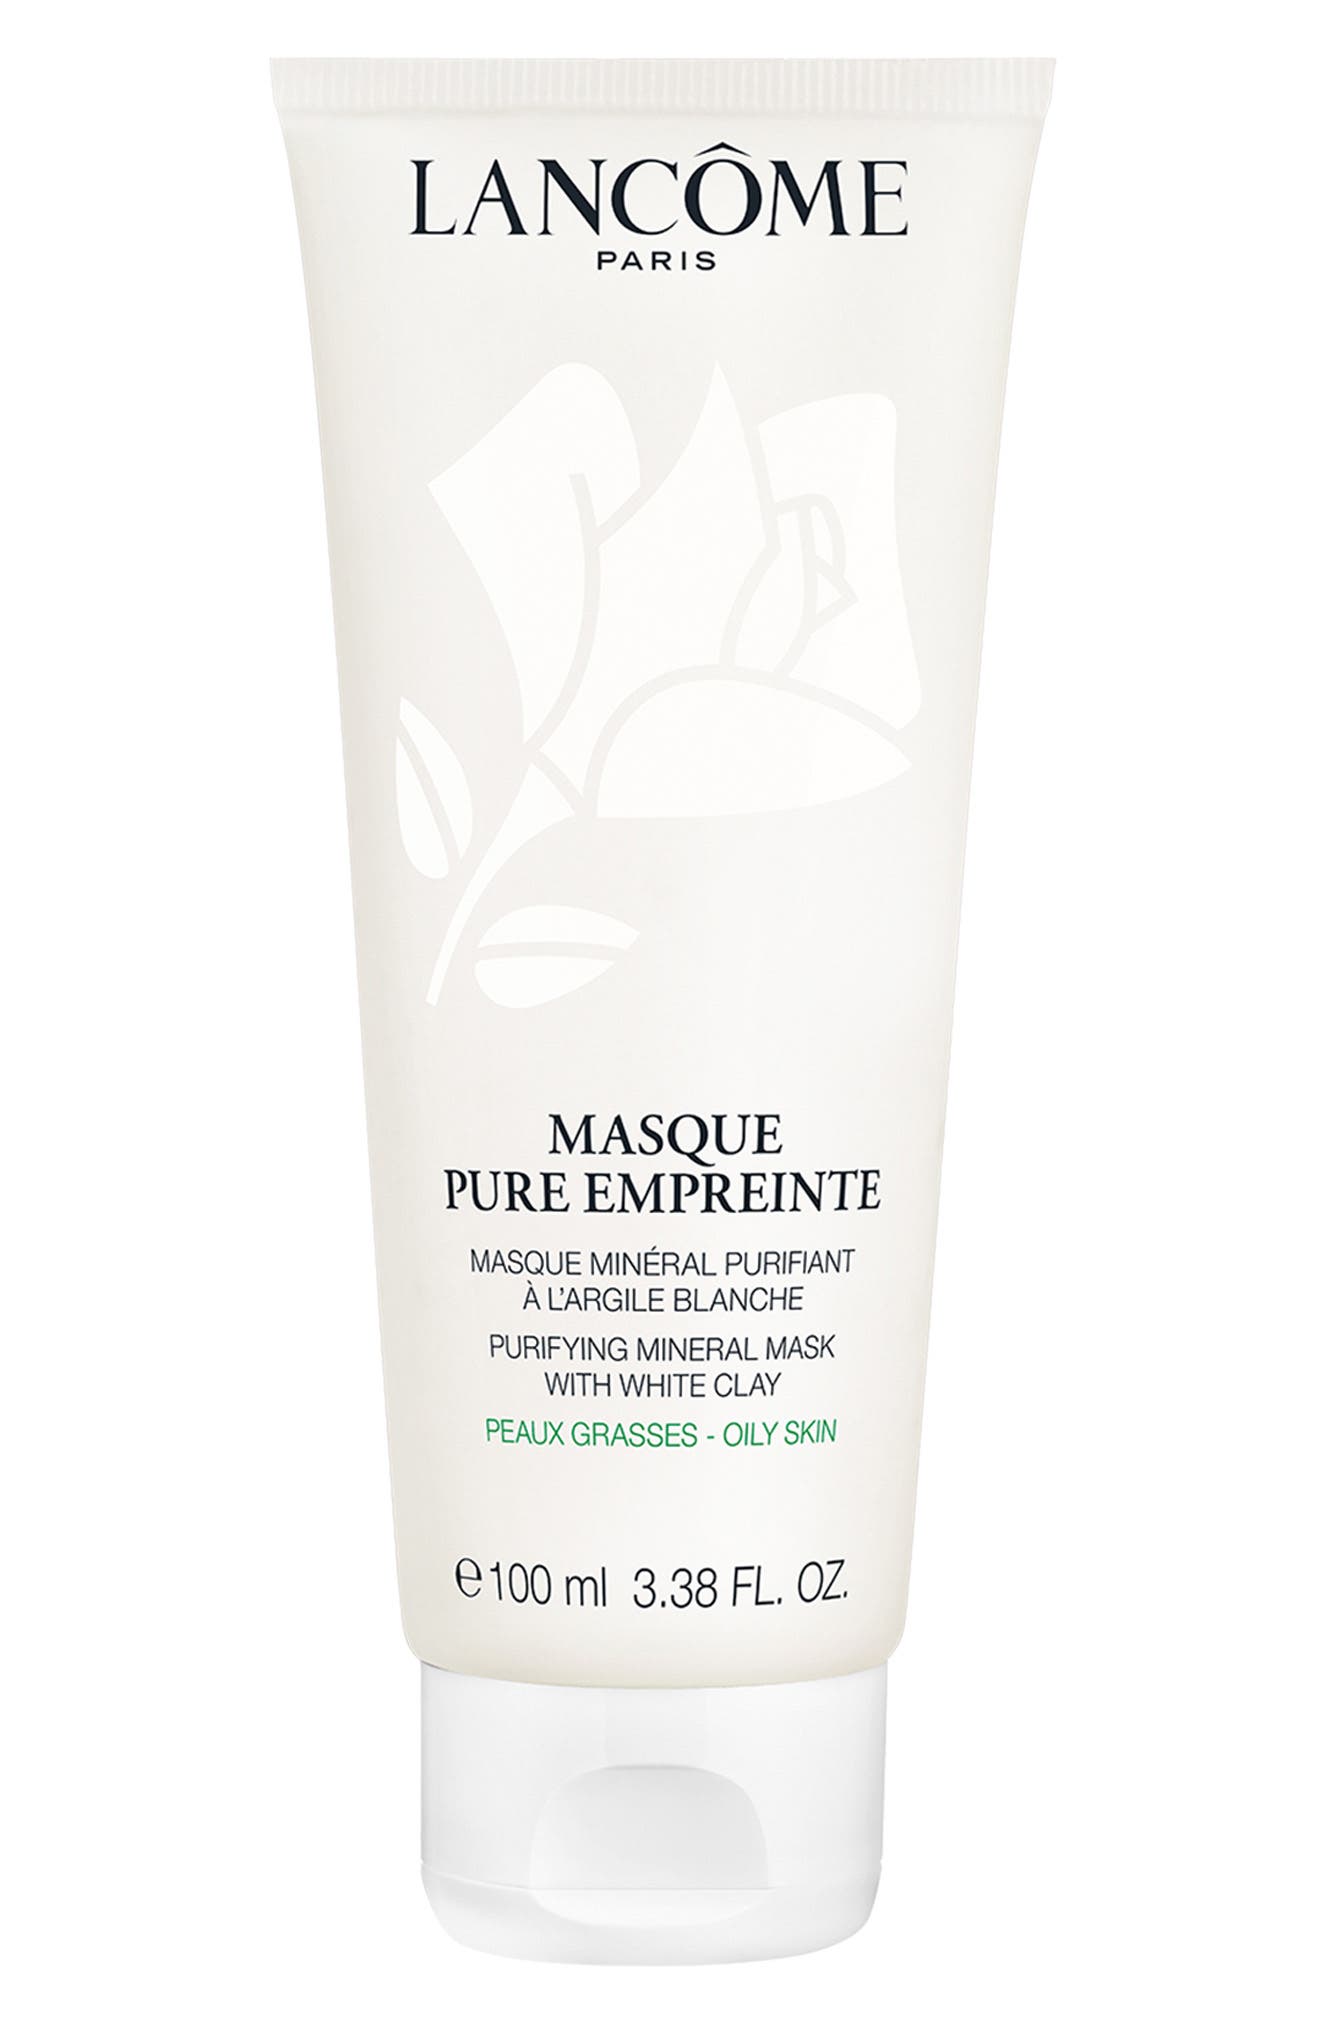 EAN 3147758864373 product image for Lancome Pure Empreinte Masque Purifying Mineral Mask | upcitemdb.com